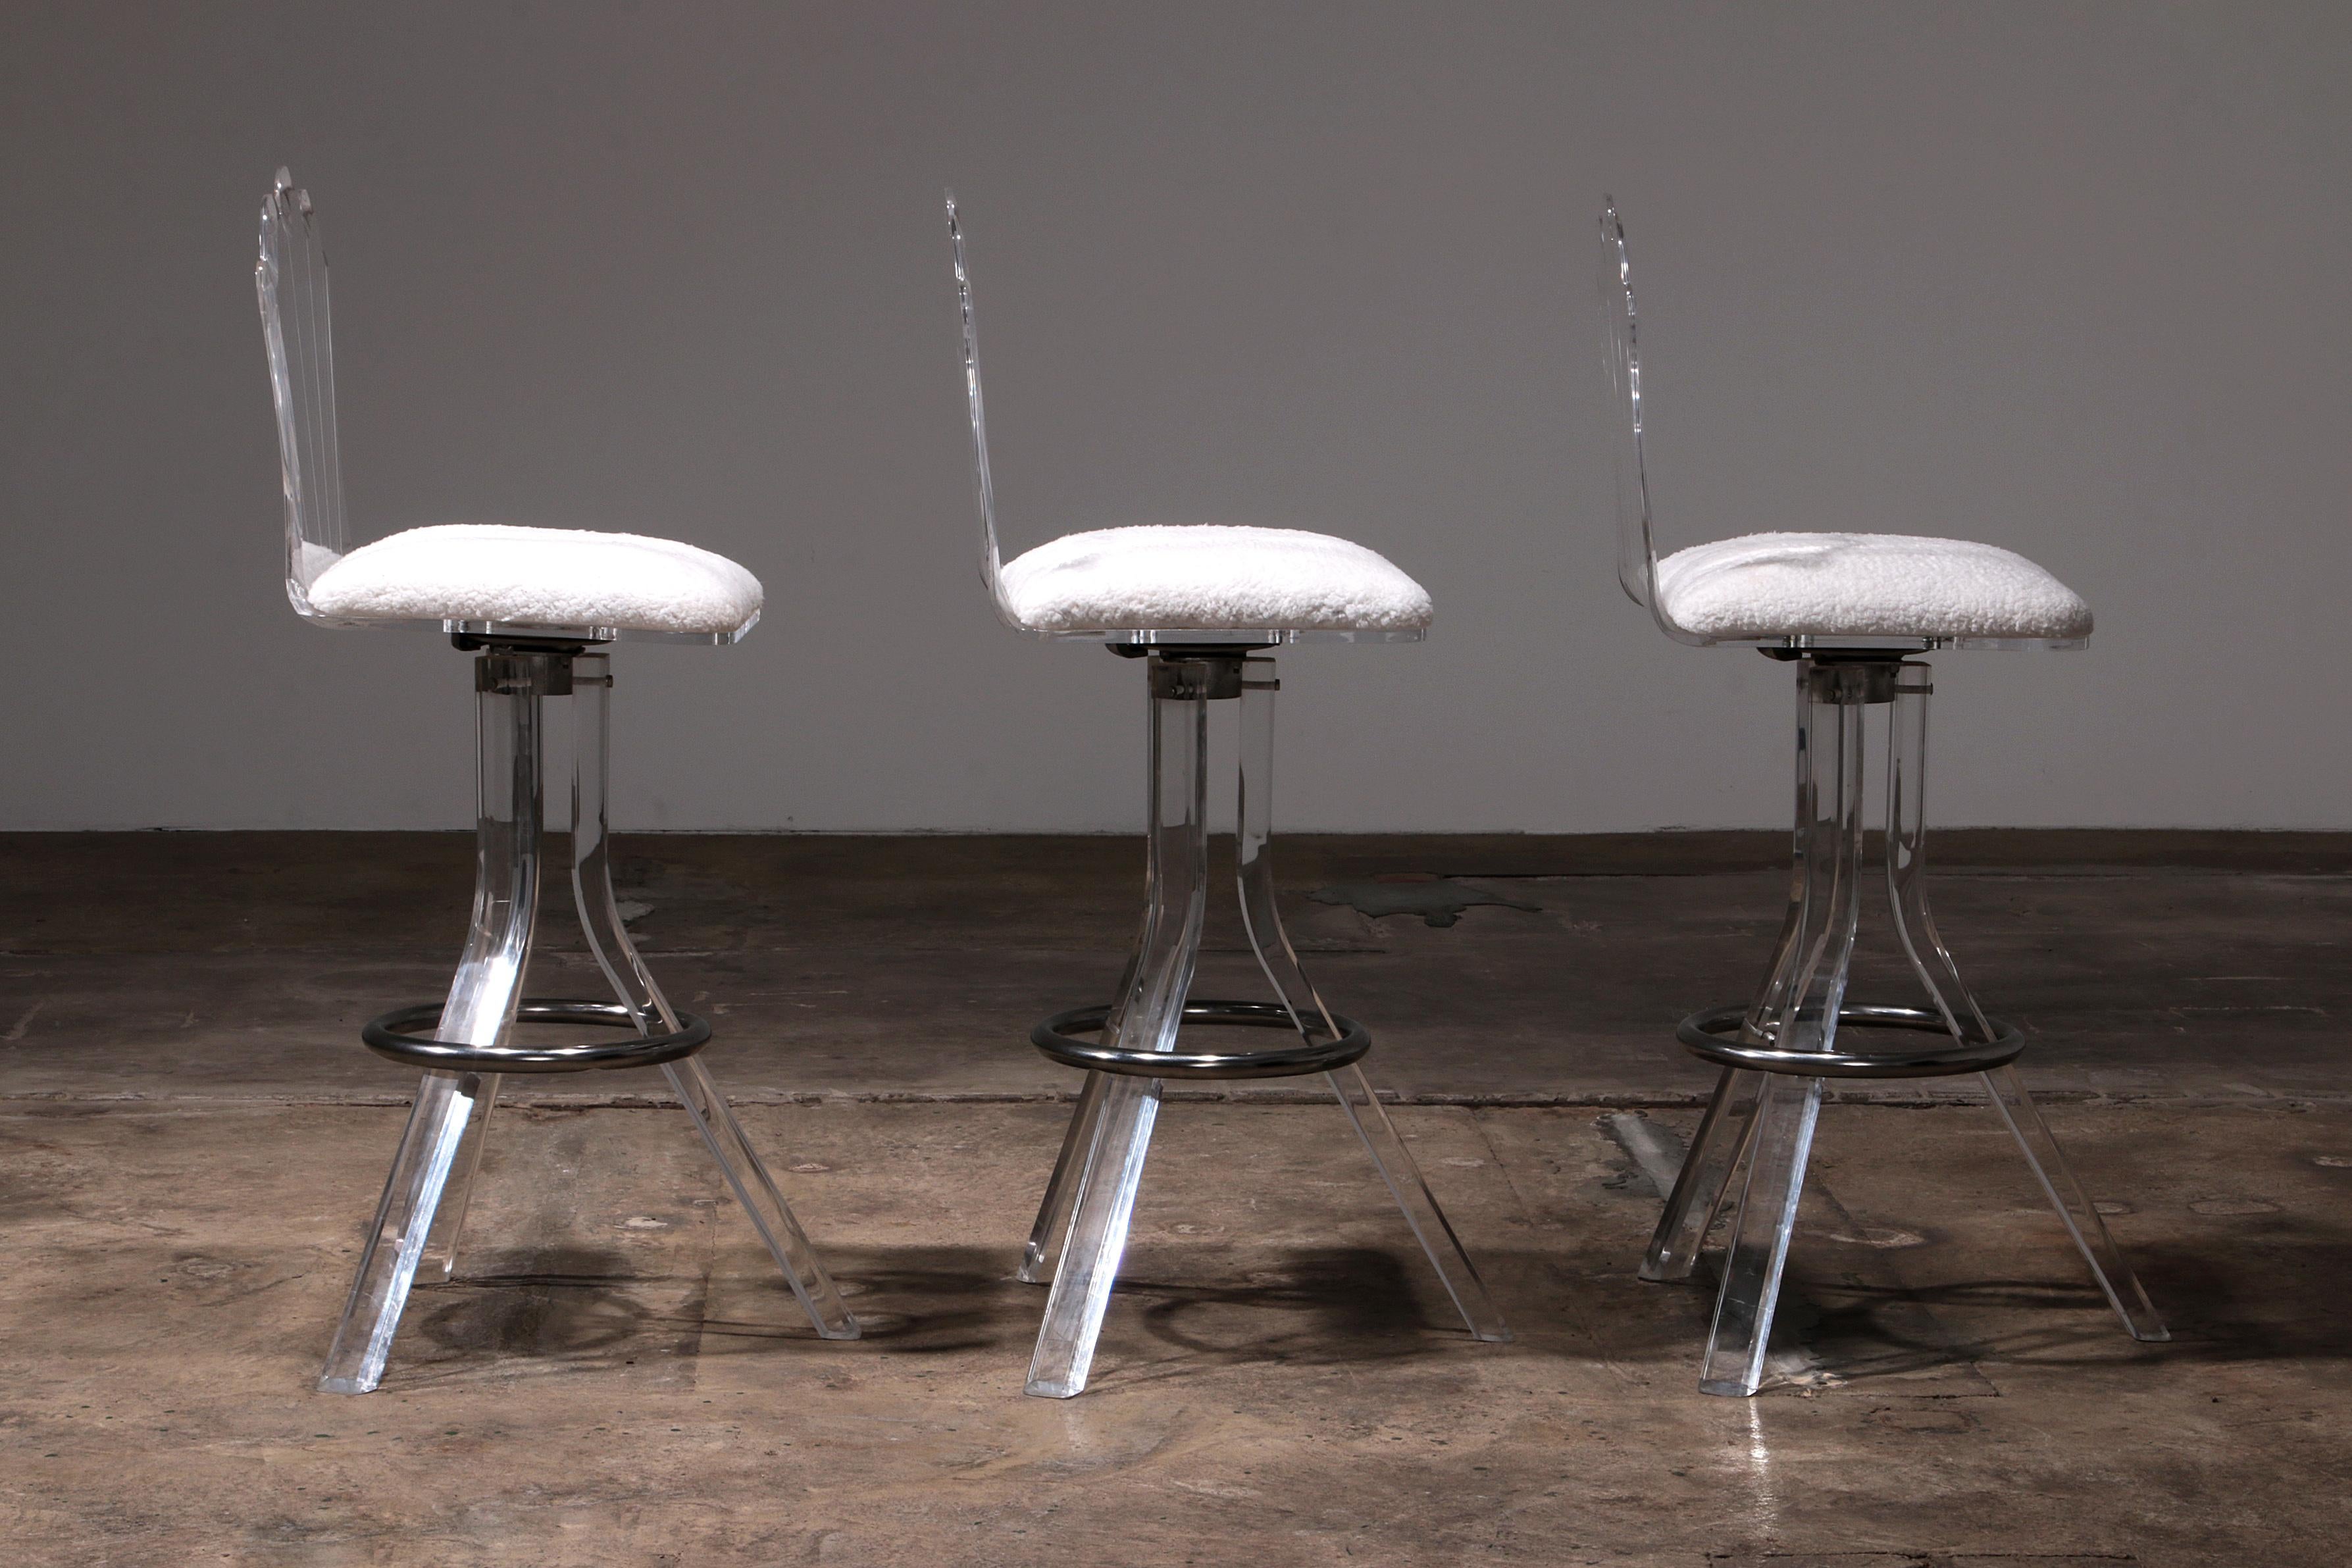 Fabric Plexiglass lucite bar stools and chrome swivel bar chairs, Hill Manufacturers For Sale